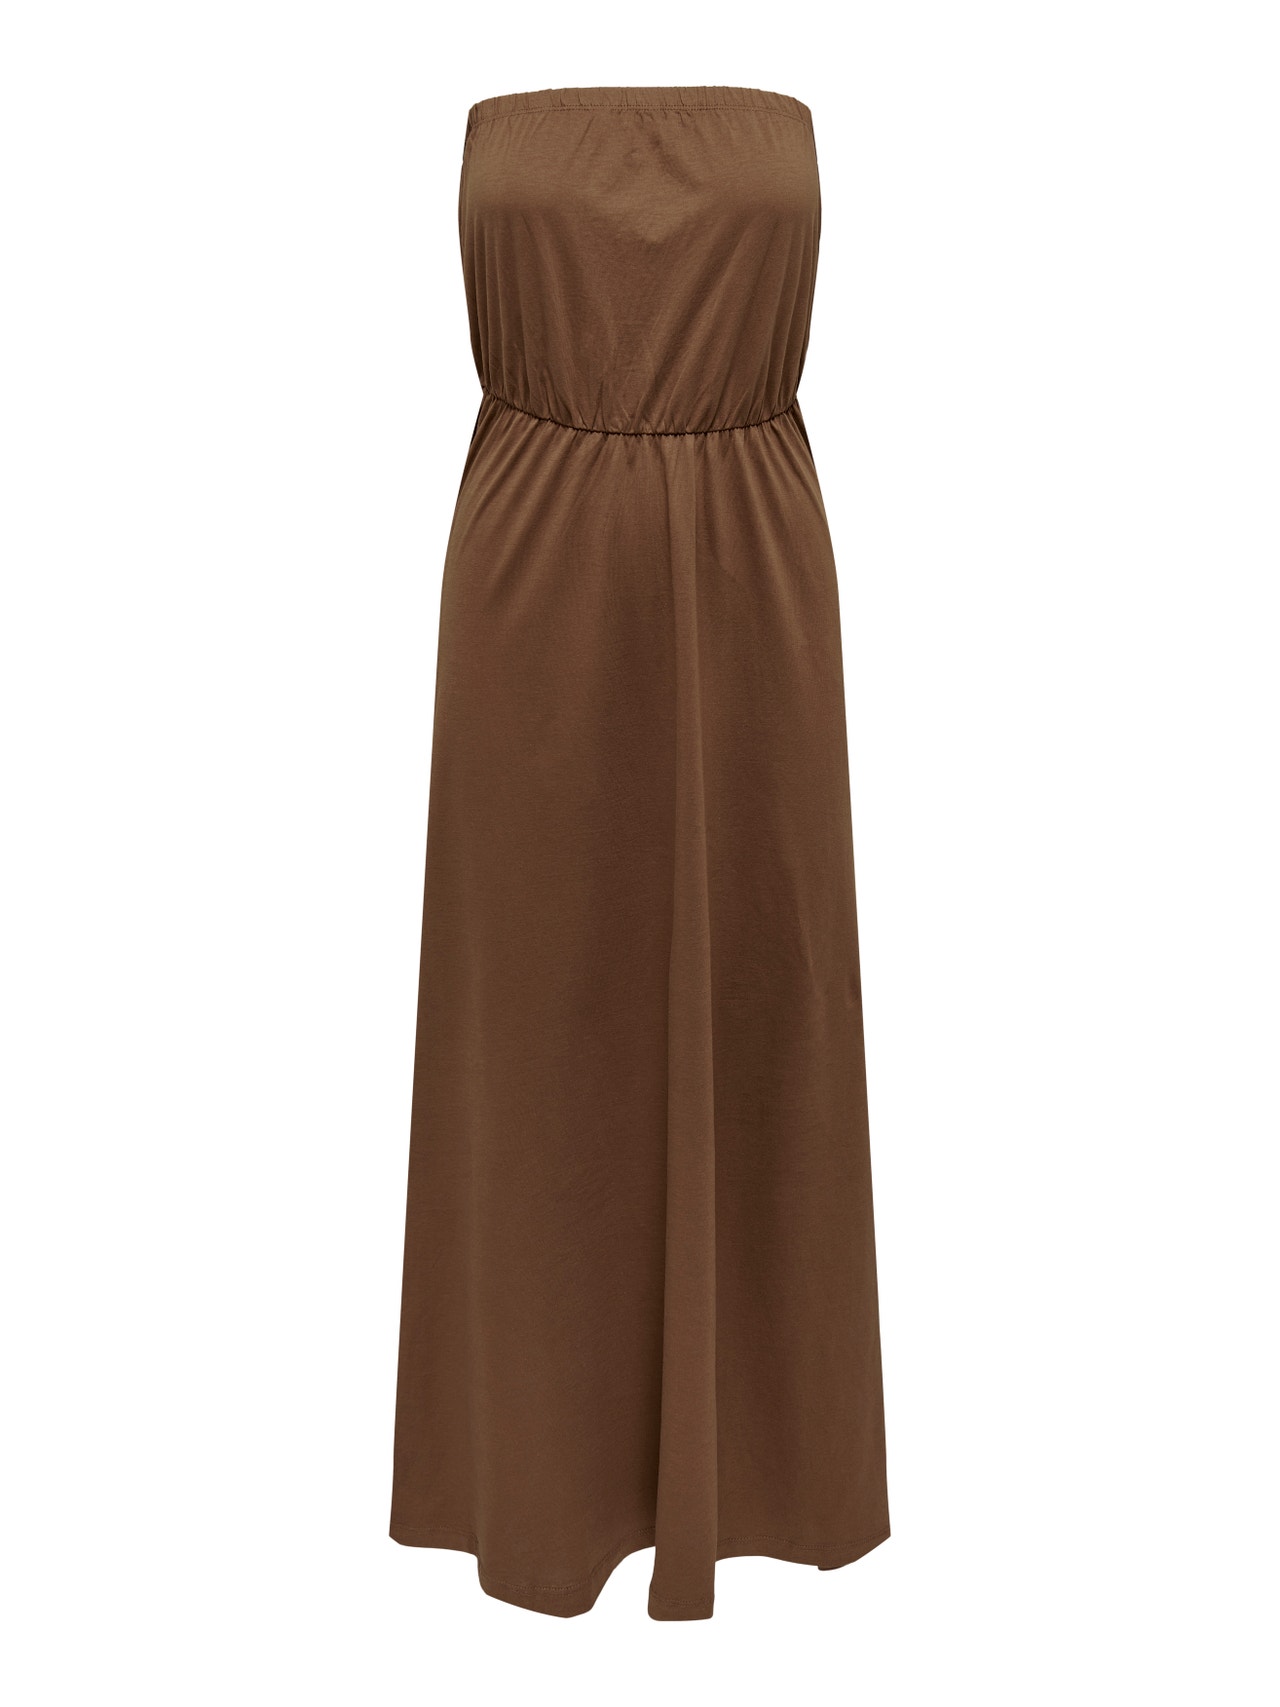 ONLY Bandeau Maxikleid -Toffee - 15261914